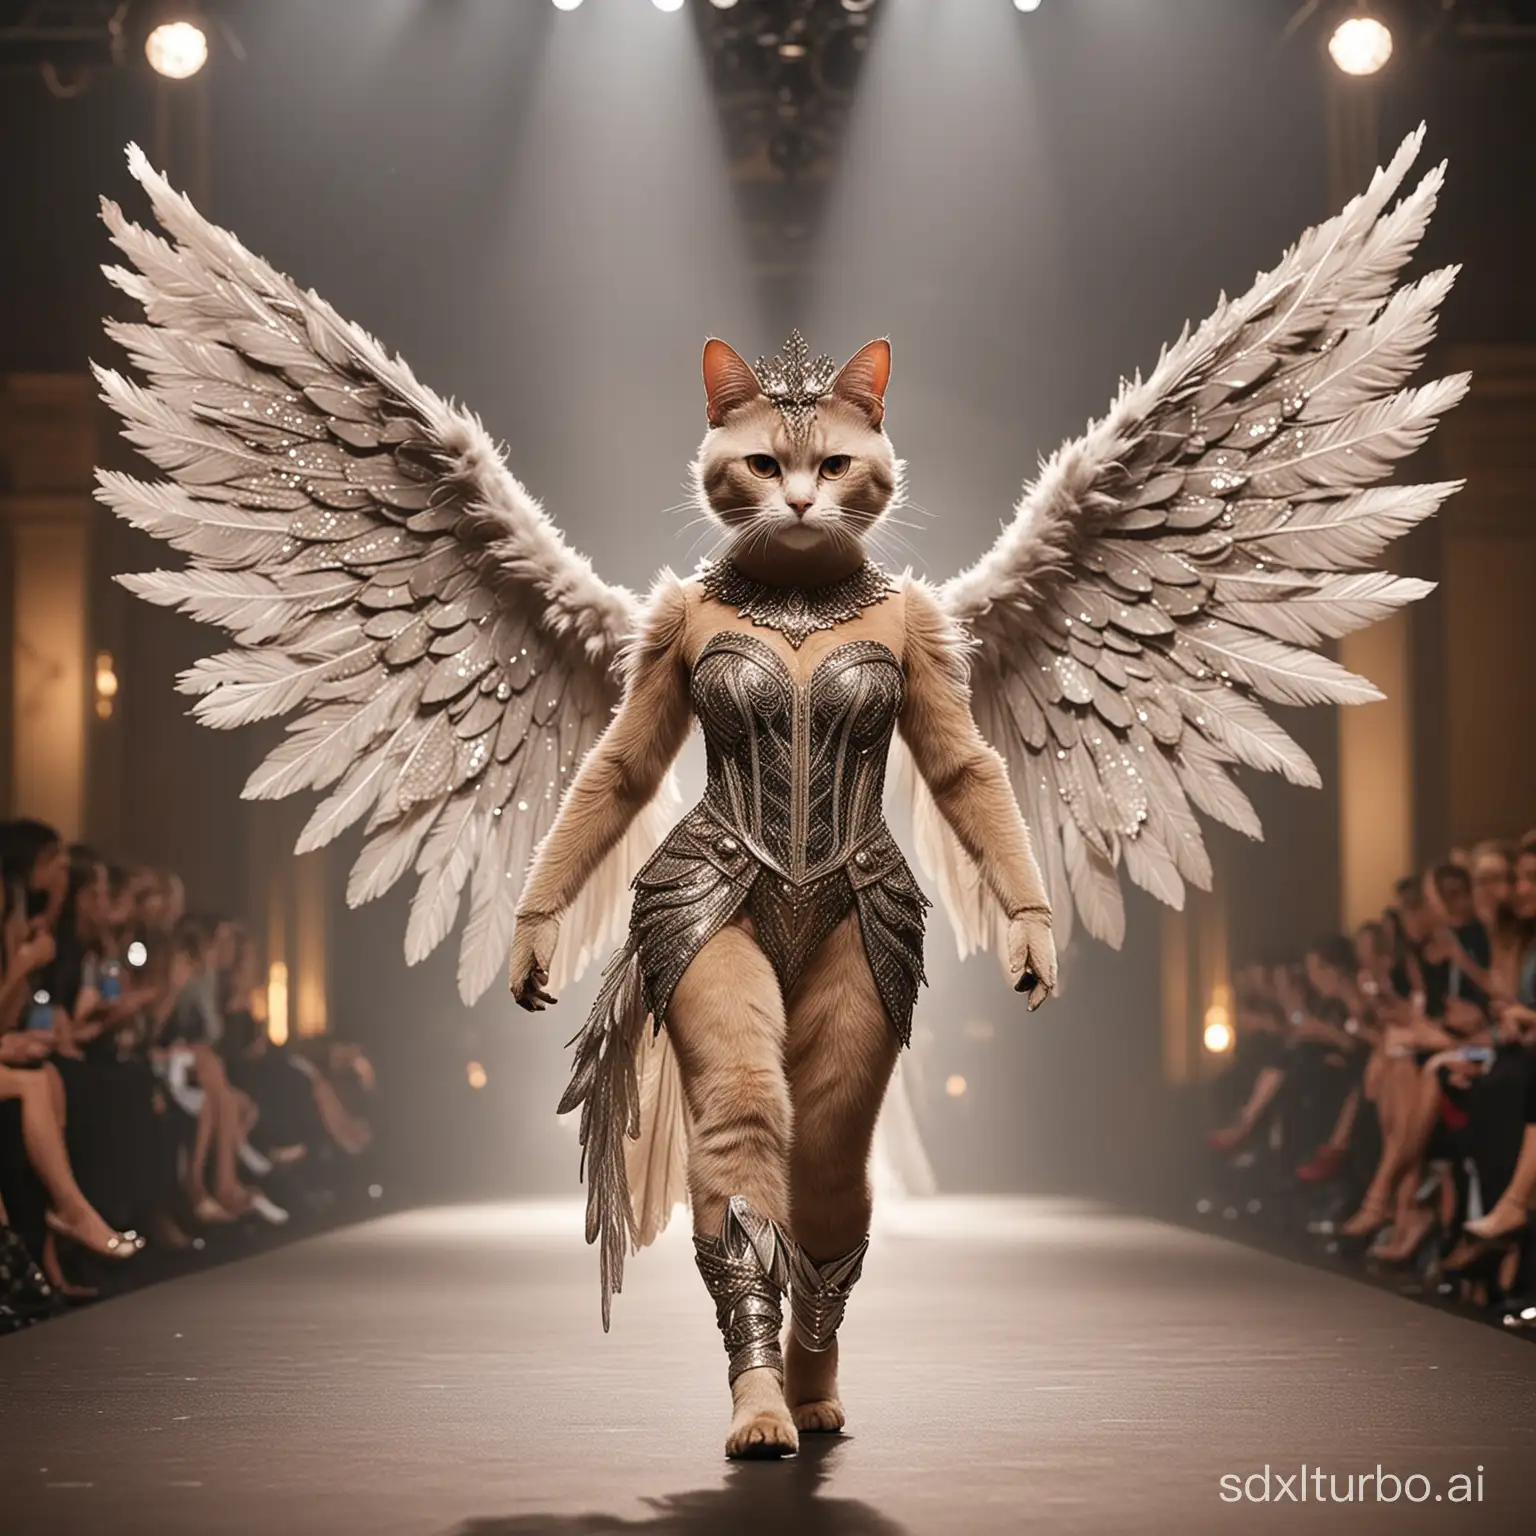 A grand entrance on the runway at a cat-themed fashion show, featuring an anthropomorphic cat model. This scene showcases the first cat model striding confidently down the runway. She is wearing an extravagant, glittering outfit and majestic wings that sparkle under the runway lights. The model's attire is a blend of high fashion and fantasy, making a bold statement. Her expression is confident and poised. The image should capture the glamour and elegance of the moment, with a focus on the intricate details of her outfit and wings. This image is vertical, optimized for mobile viewing, with a shallow depth of field focusing on the model.